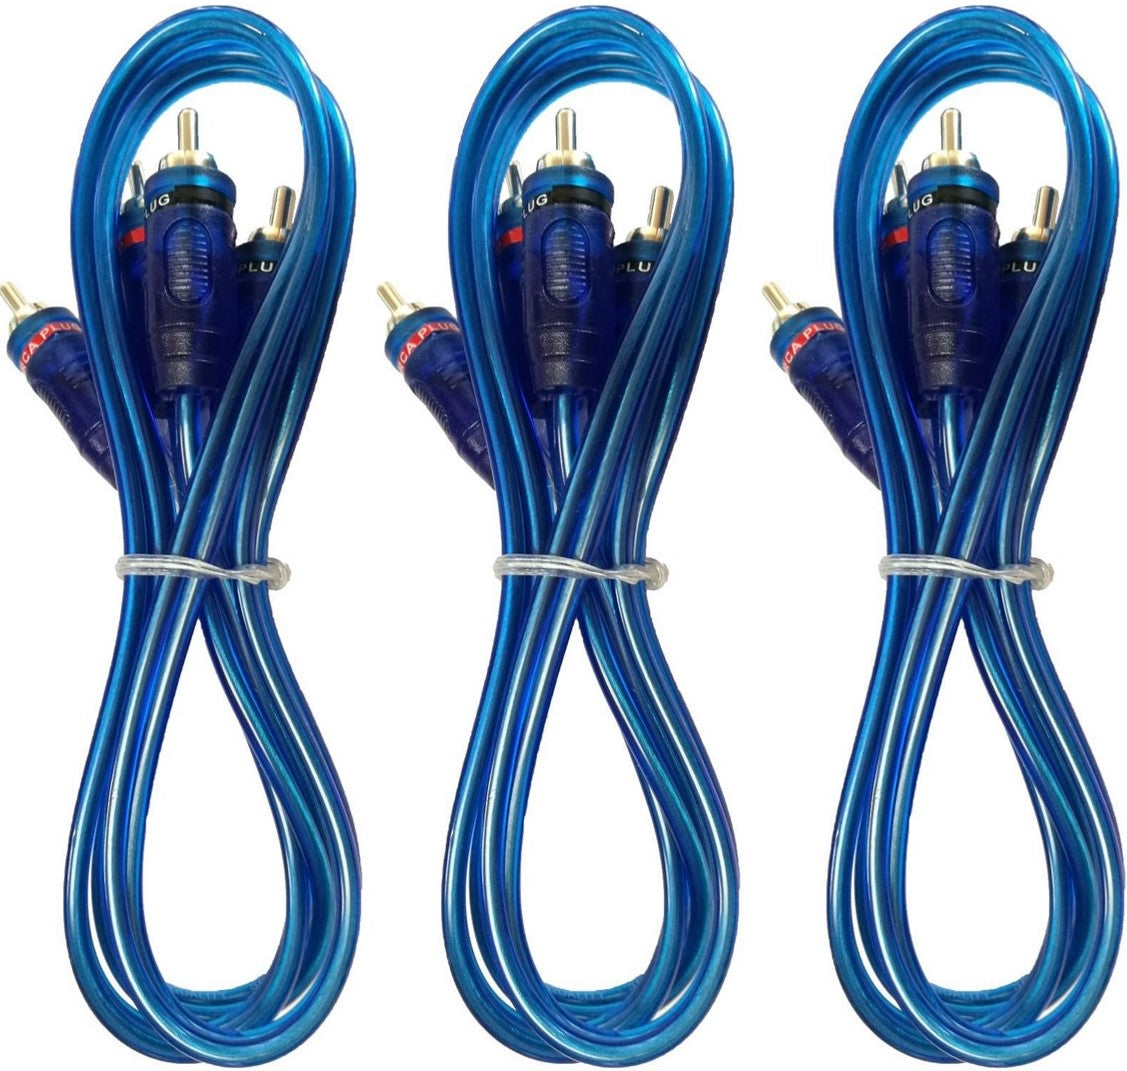 3 ABSOLUTE 3 Ft 2 Ch Blue Twisted Car Amp Gold RCA Jack Cable Interconnect